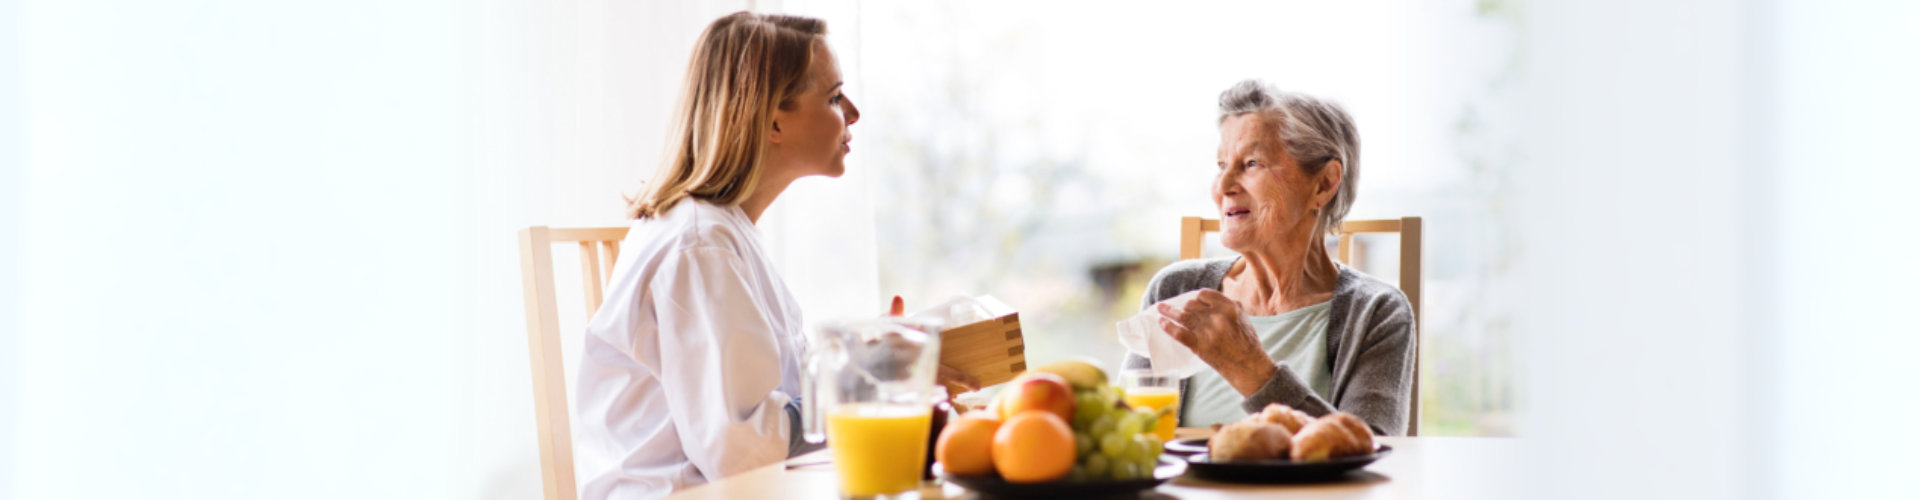 physicians talking to senior woman with healthy foods in the table